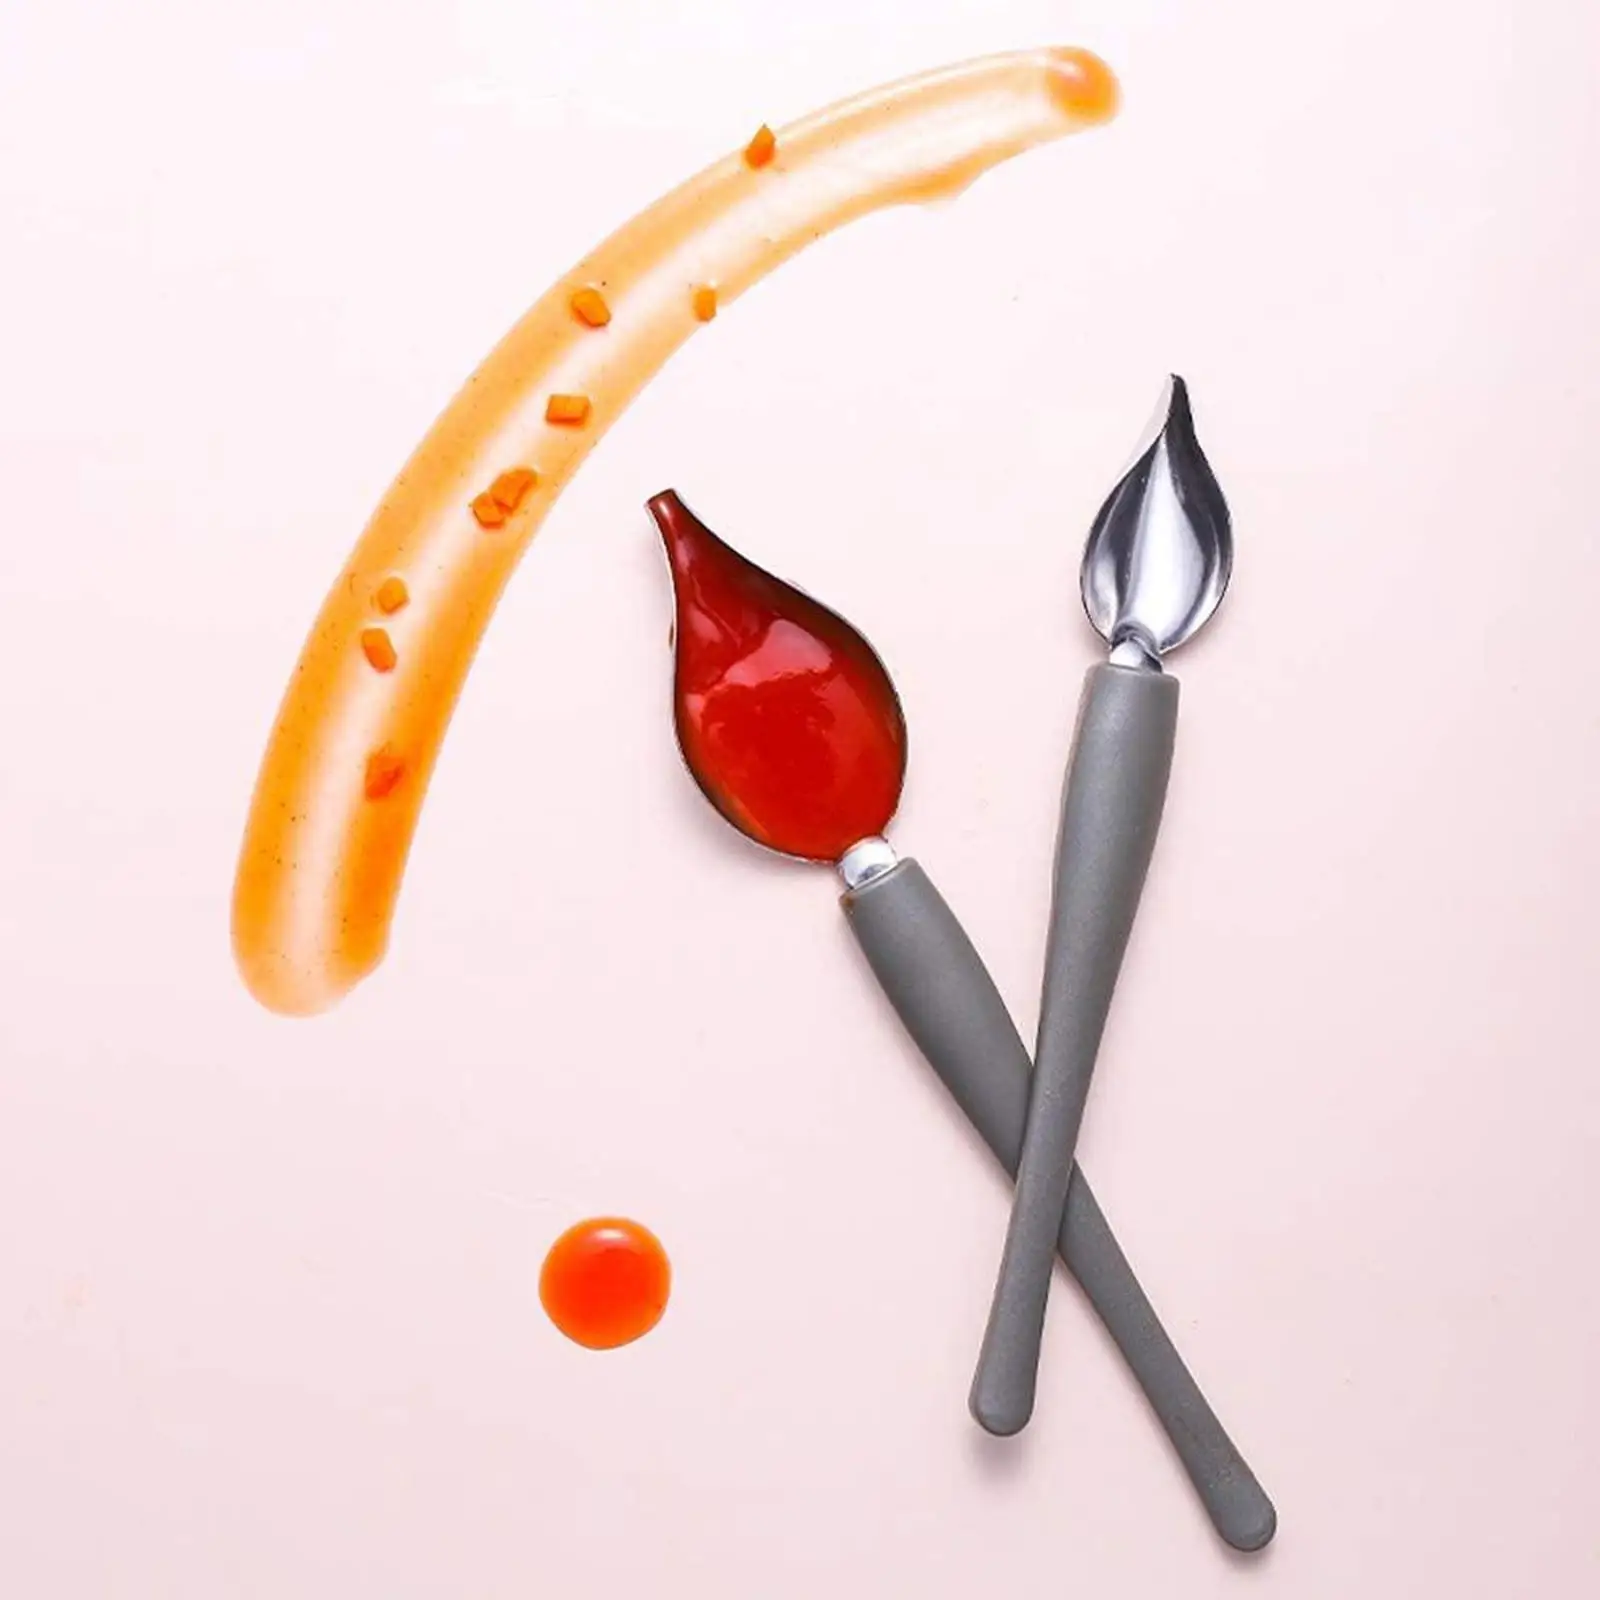 Chef Decorating Pencil Draw Tools Stainless Steel Portable Sauce Painting Dessert Coffee Spoon Kitchen Home Supplies